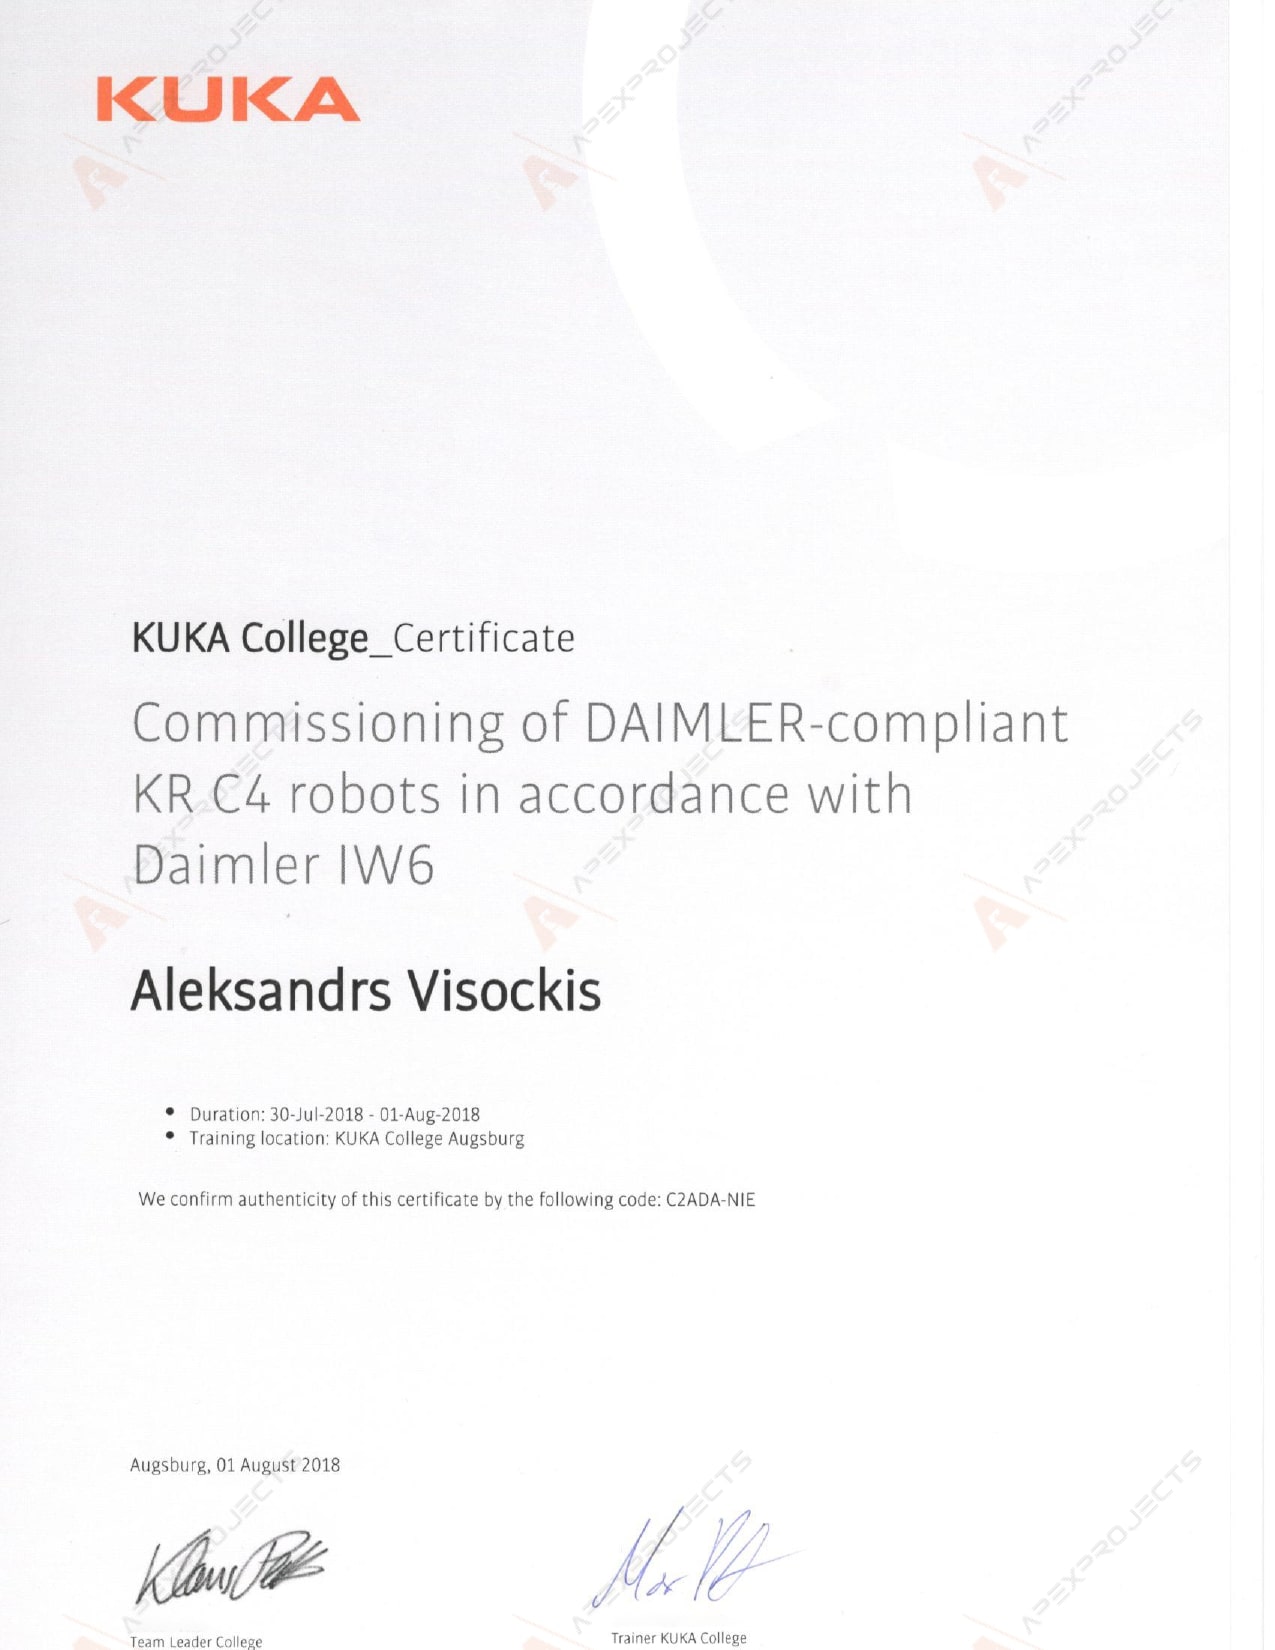 Kuka College Certificate – Commissioning of DAIMLER-compliant KR C4 robots in accordance with Daimler IW6-1_page-0001-min